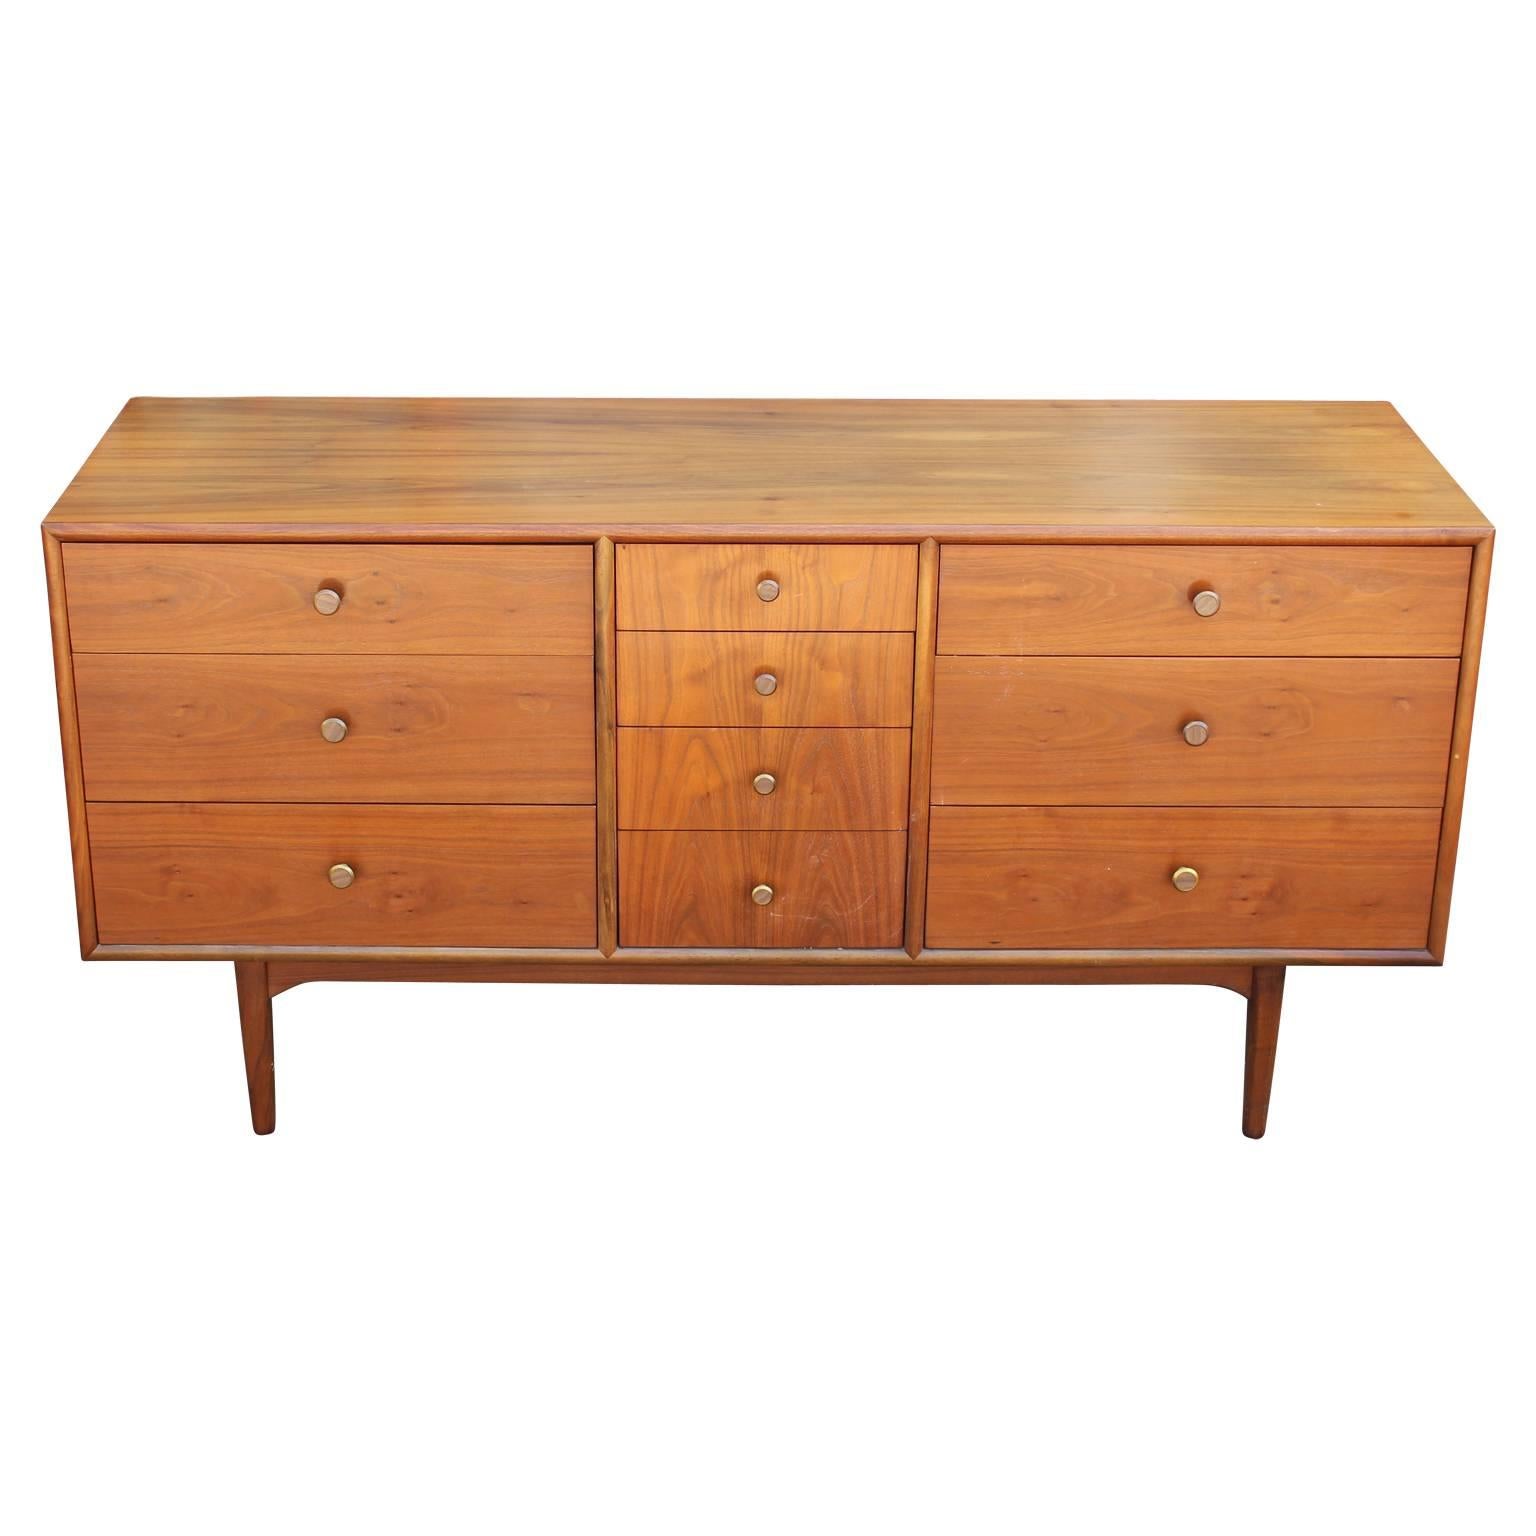 Beautiful walnut ten-drawer dresser by Kipp Stewart and Stewart McDougall for Drexel's Declaration line. Beautiful walnut wood grain with brass and faux wood pulls. Featuring four small drawers in the center and three larger drawers on either side,